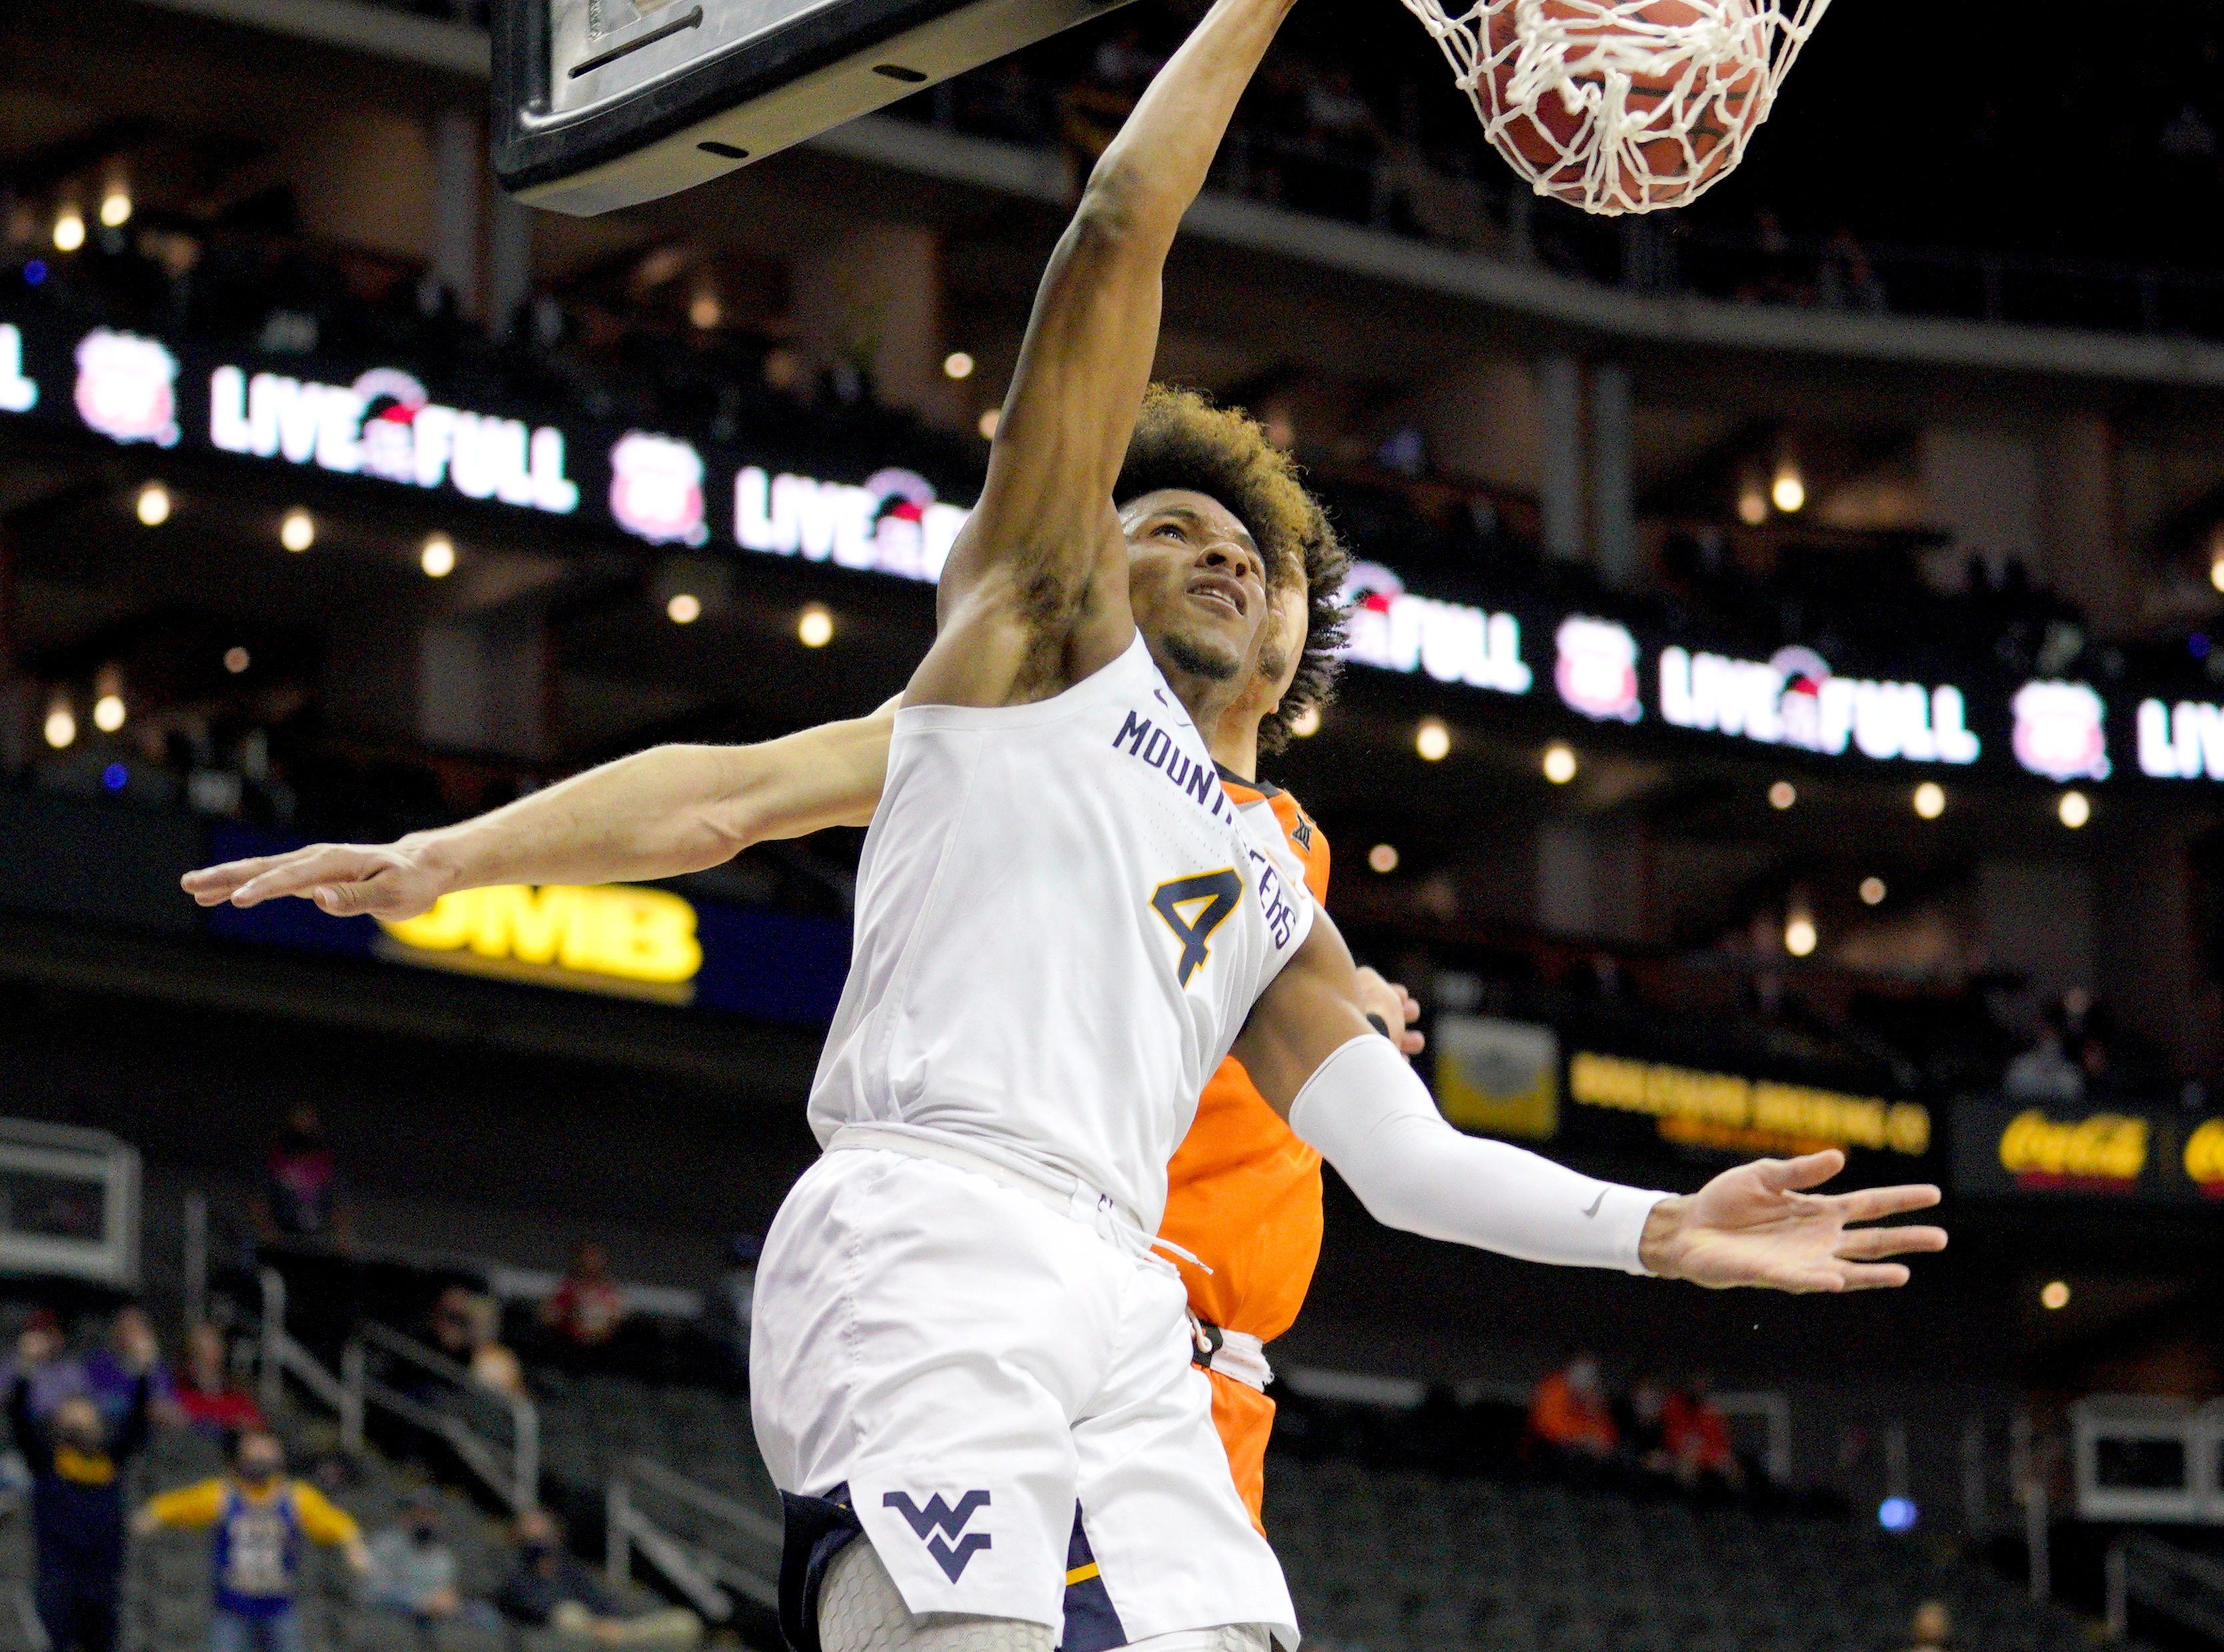 NBA draft: WVU's Miles McBride goes to New York Knicks in 2nd